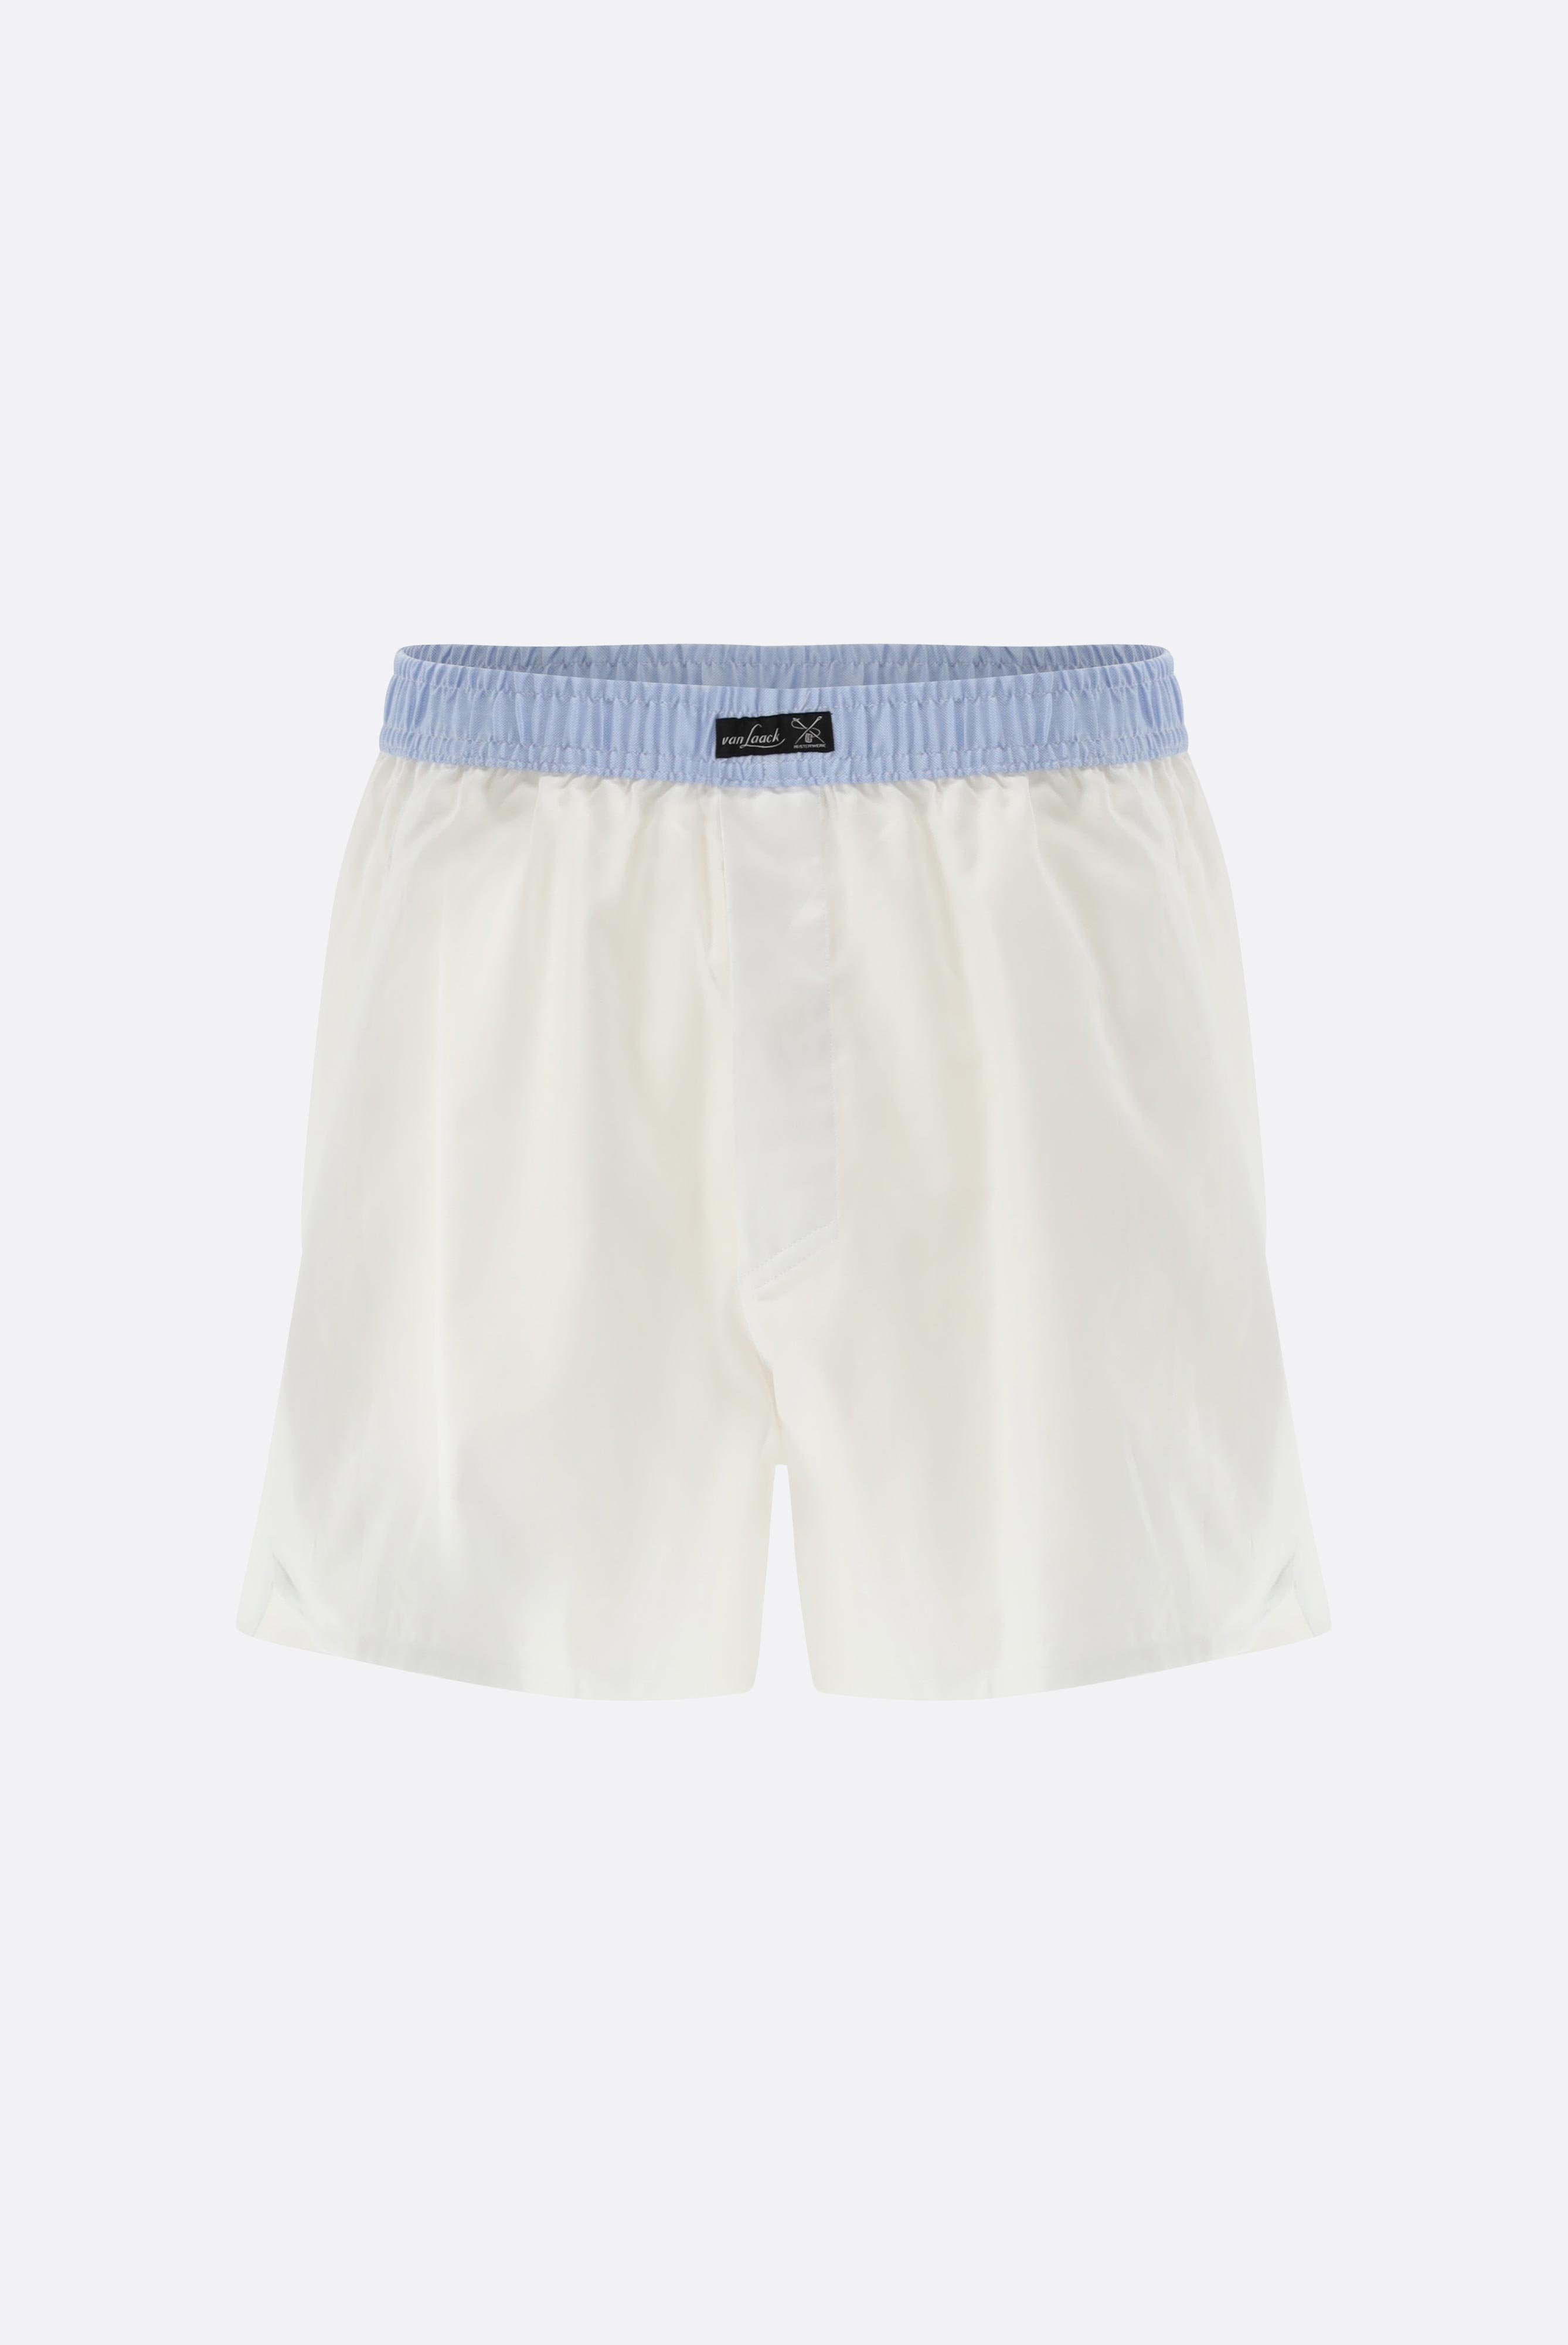 Oxford Boxer Shorts with Waistband Contrast